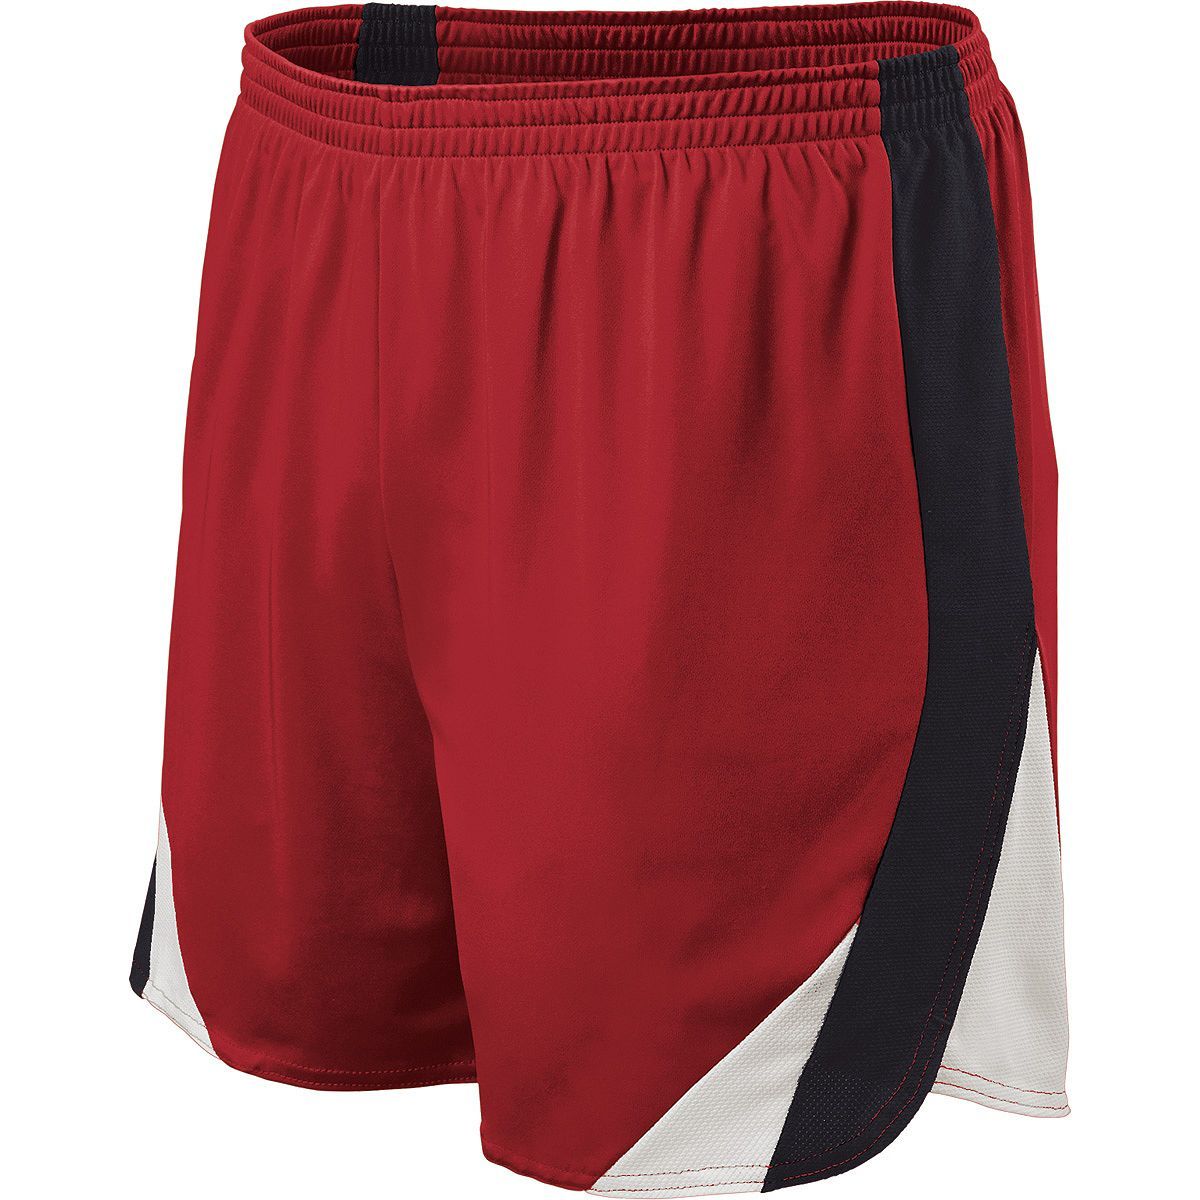 Holloway Approach Shorts in Scarlet/Black/White  -Part of the Adult, Adult-Shorts, Track-Field, Holloway product lines at KanaleyCreations.com